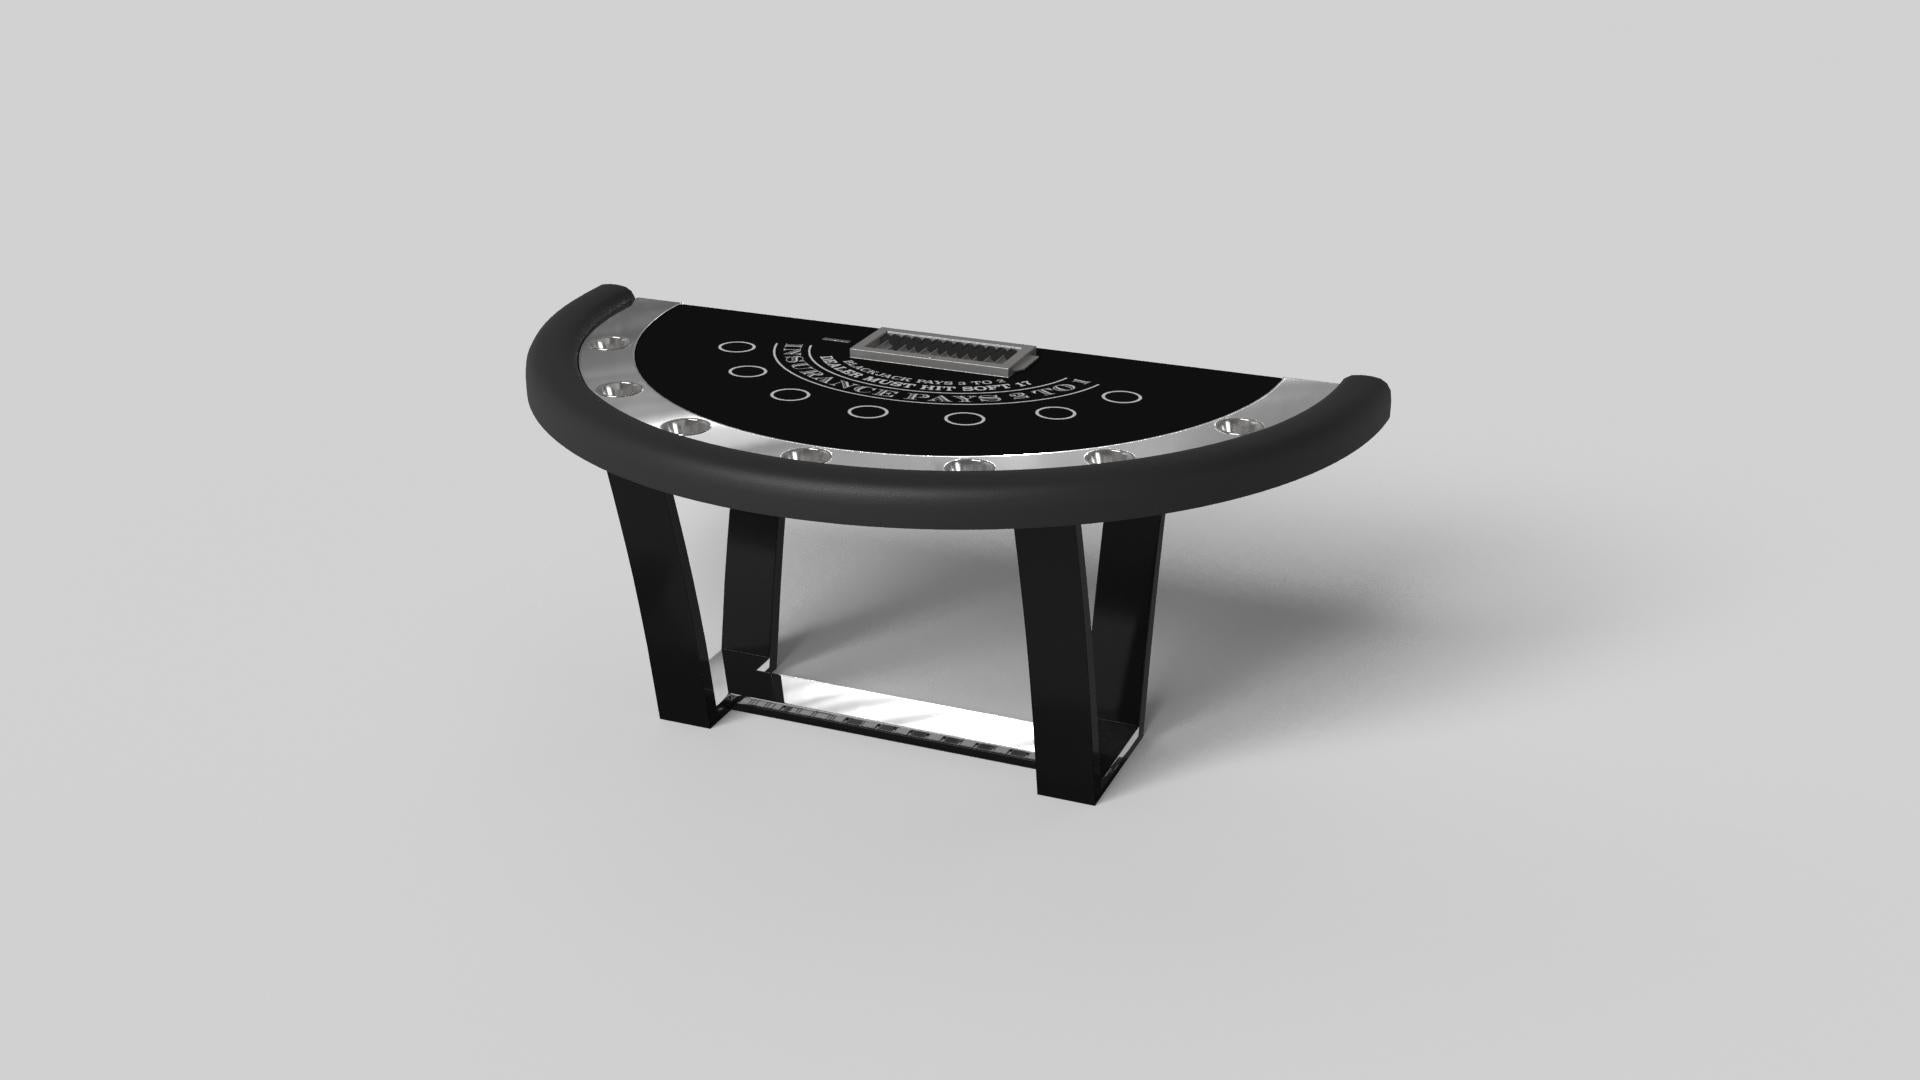 With an I-shaped metal base, slightly sloped metal legs, and a contrasting wood top, the Elite blackjack table exudes modern sophistication while evoking a sense of art deco design. This table is a confluence of style, made to meet today's demands